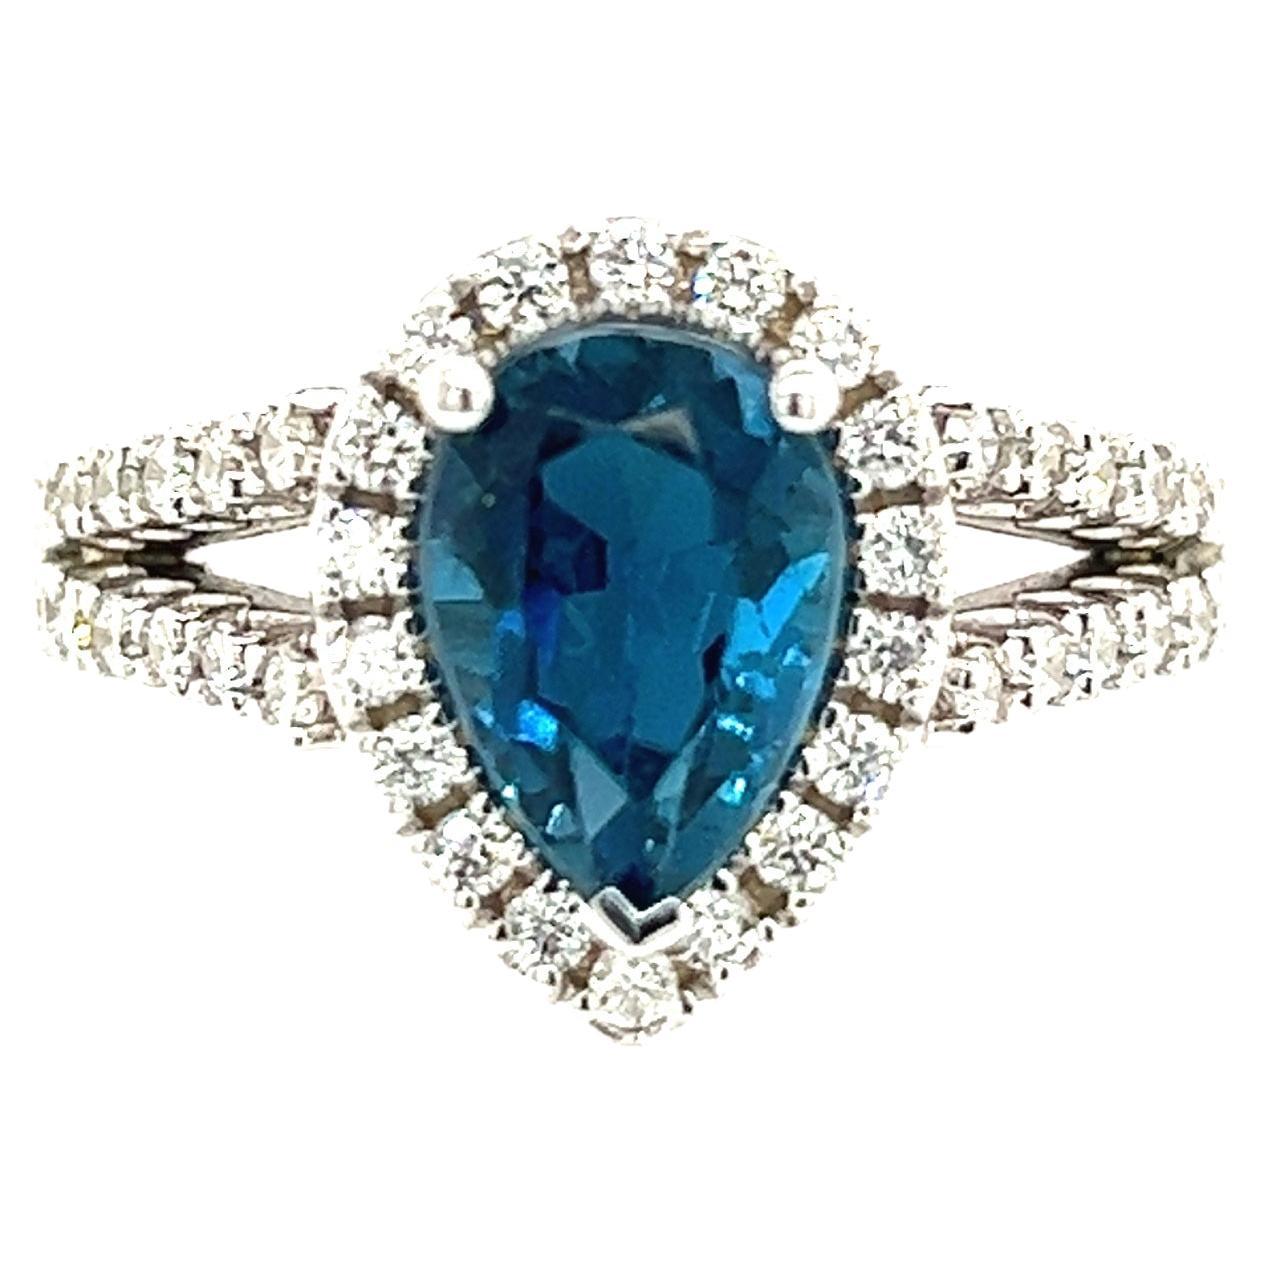 Natural Blue Topaz Diamond Ring 14k W Gold 3.77 TCW Certified For Sale